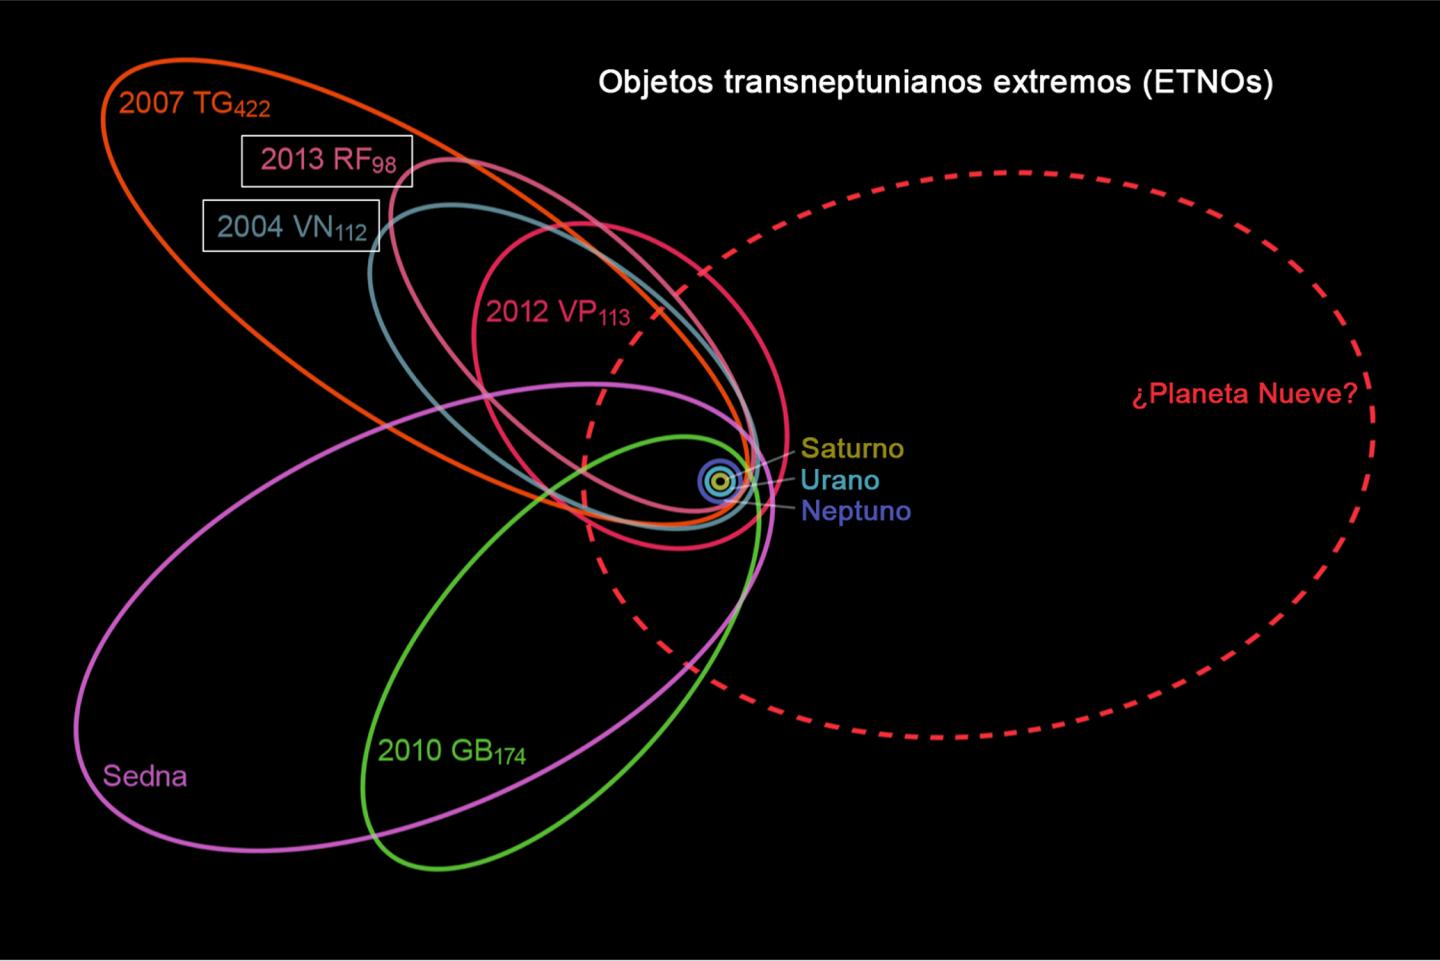 Schematic Representation of the Orbits of 6 of the 7 Extreme Trans Neptunian Objects